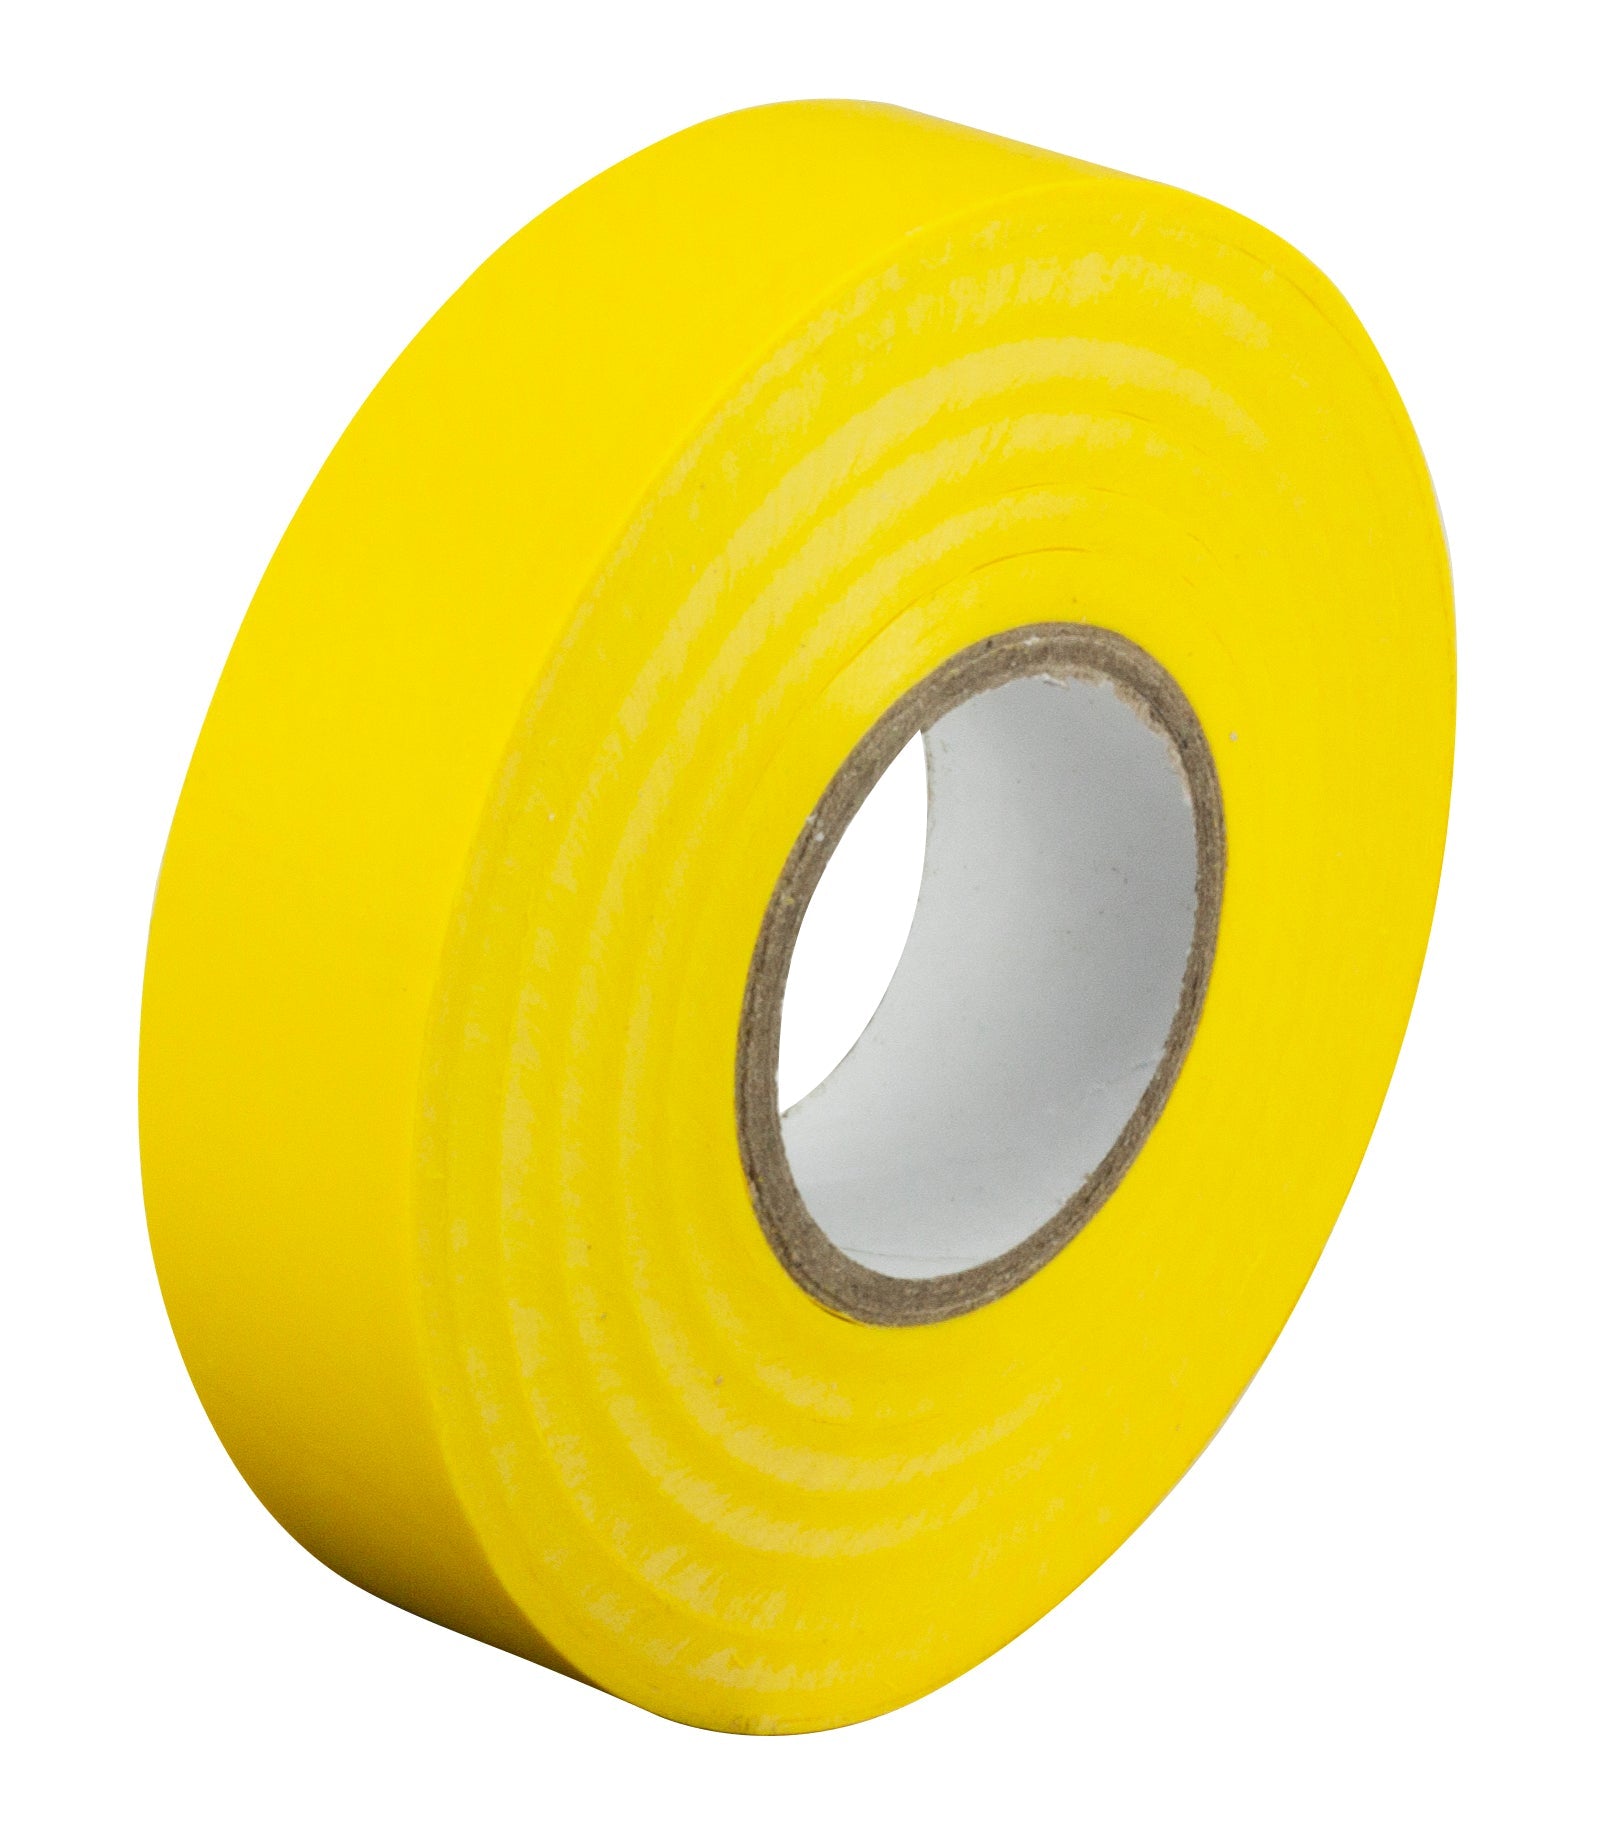 PVC Tape Size: 19mmx33m Roll - Yellow - Pack of 10